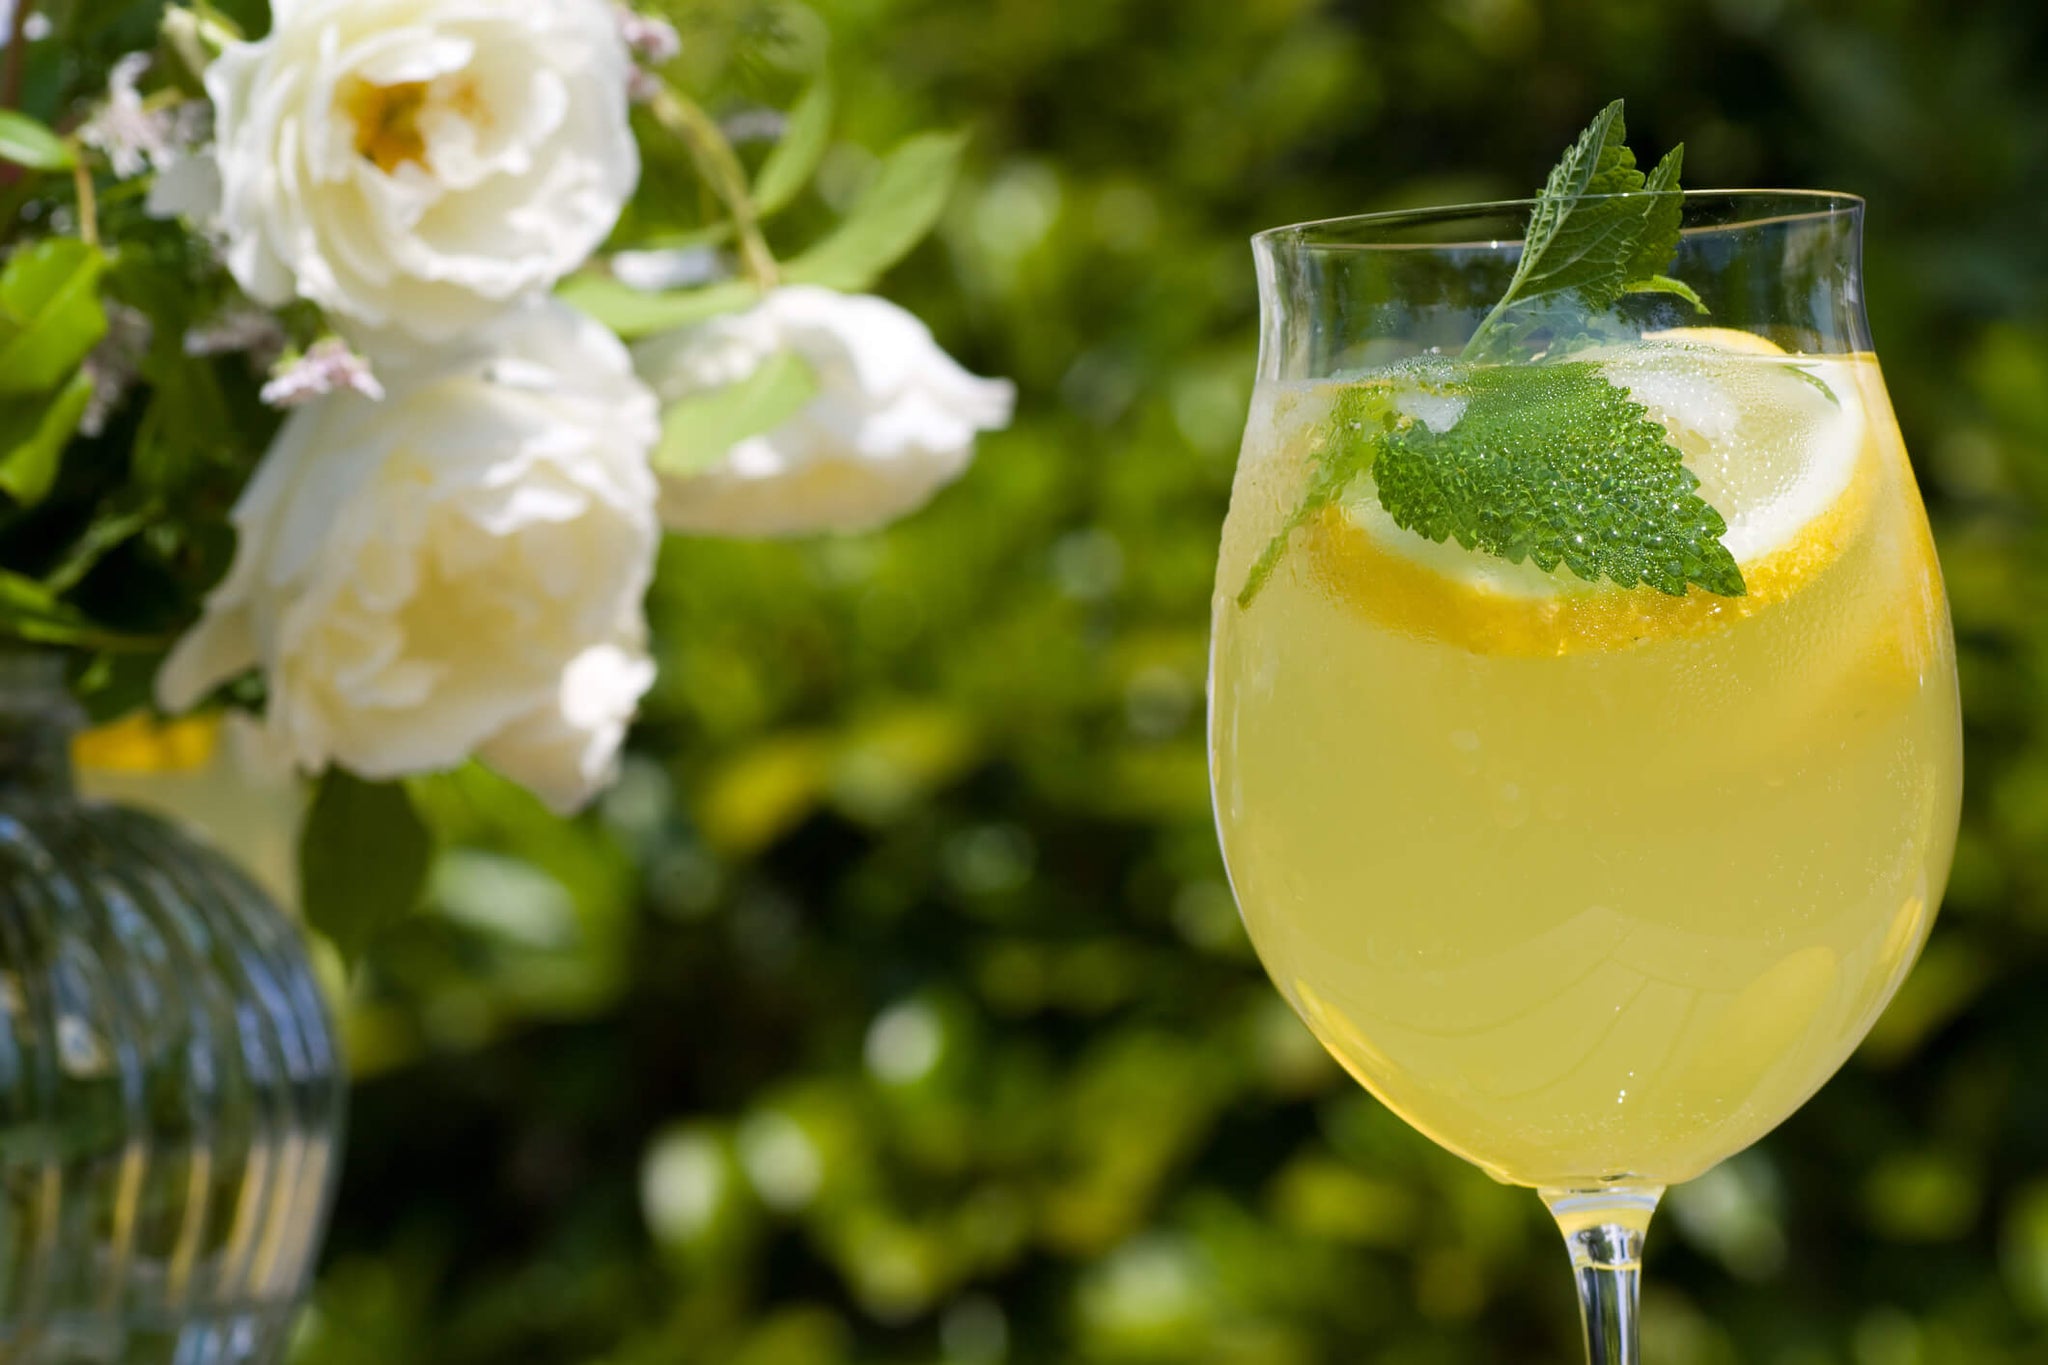 A glass of Limoncello Spritz garnished with a slice of lemon and a sprig of mint, presented in a garden setting with white roses in the background.